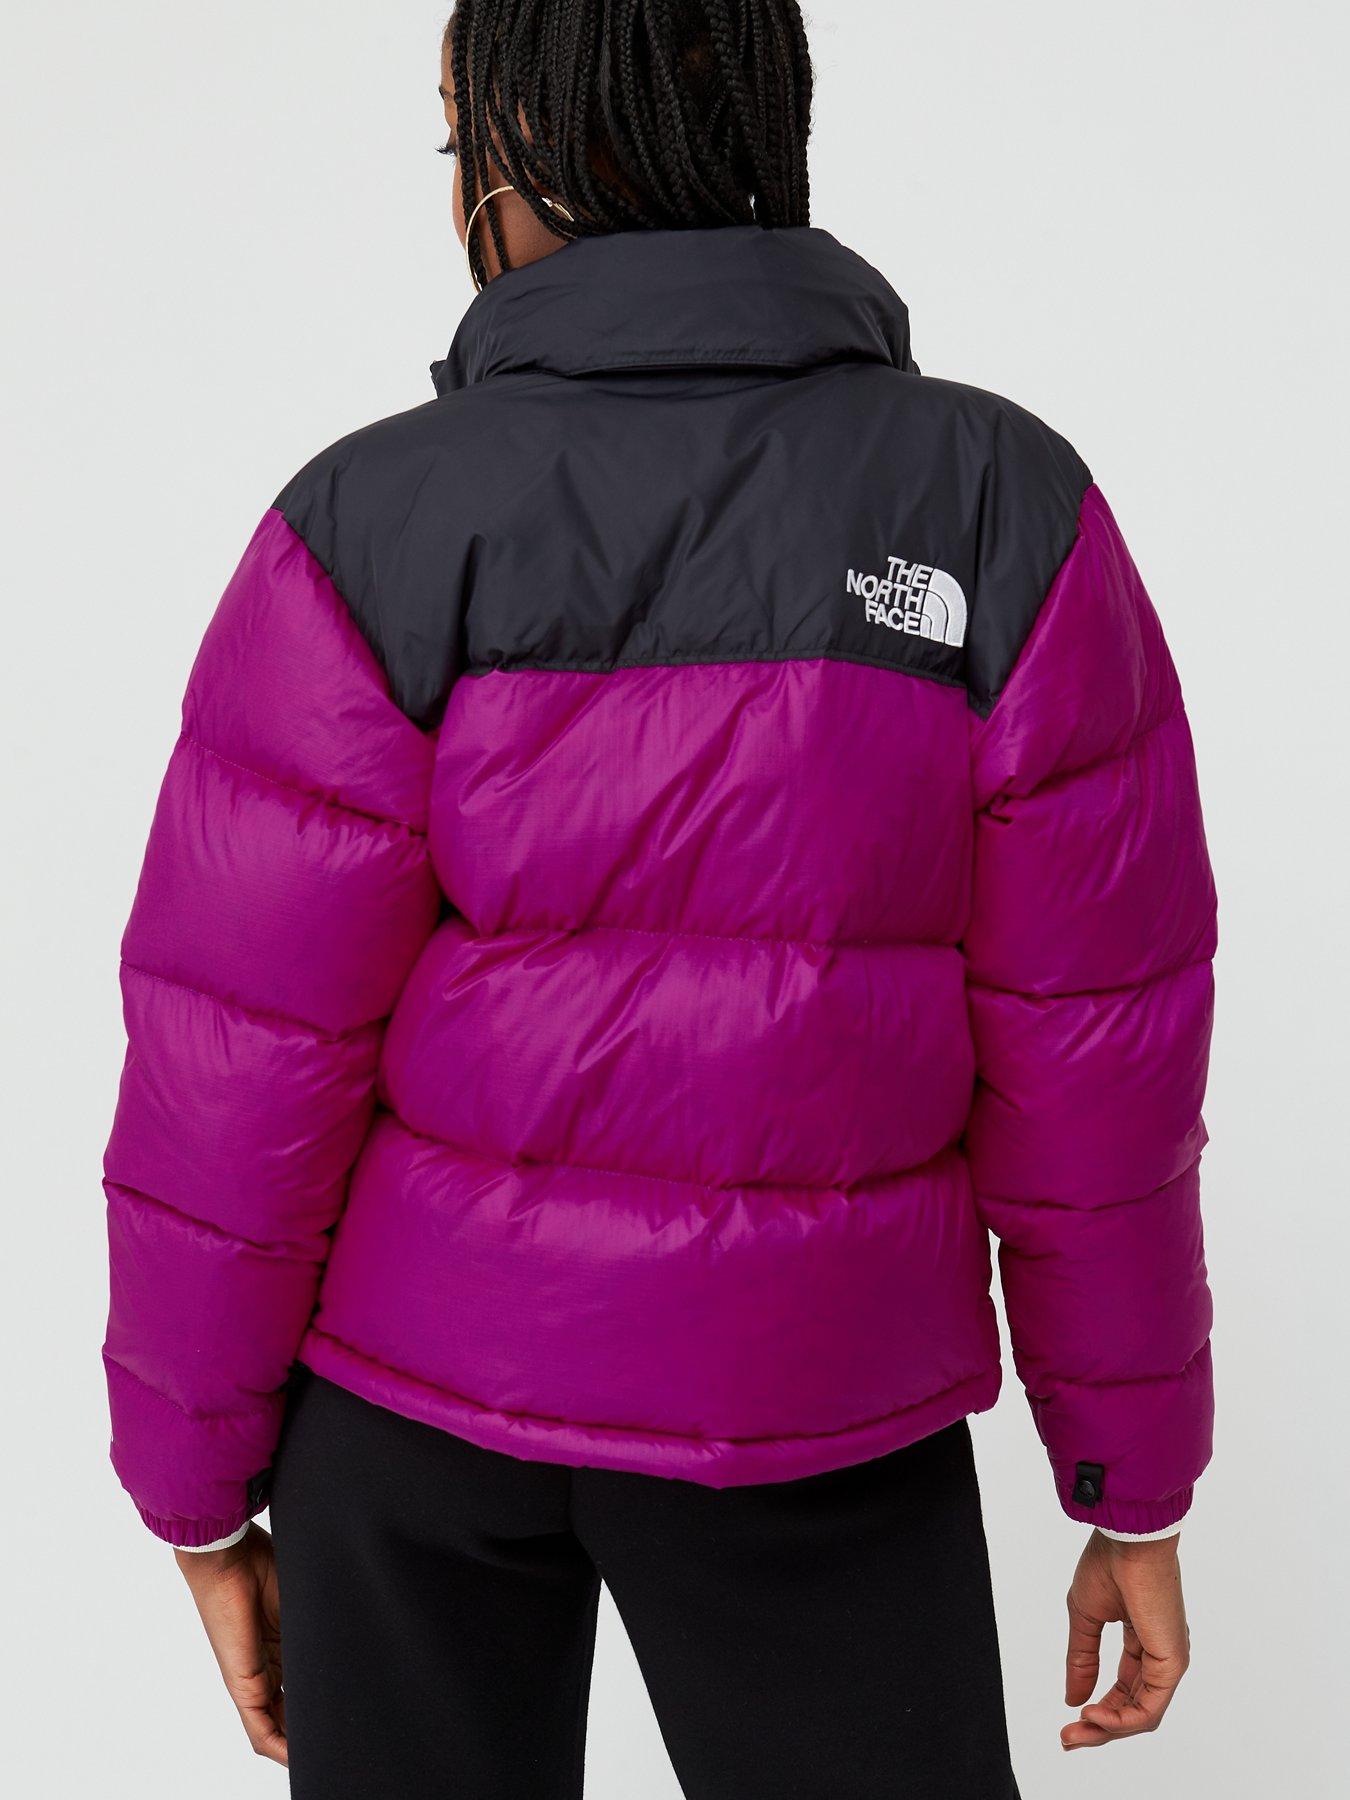 north face coat very